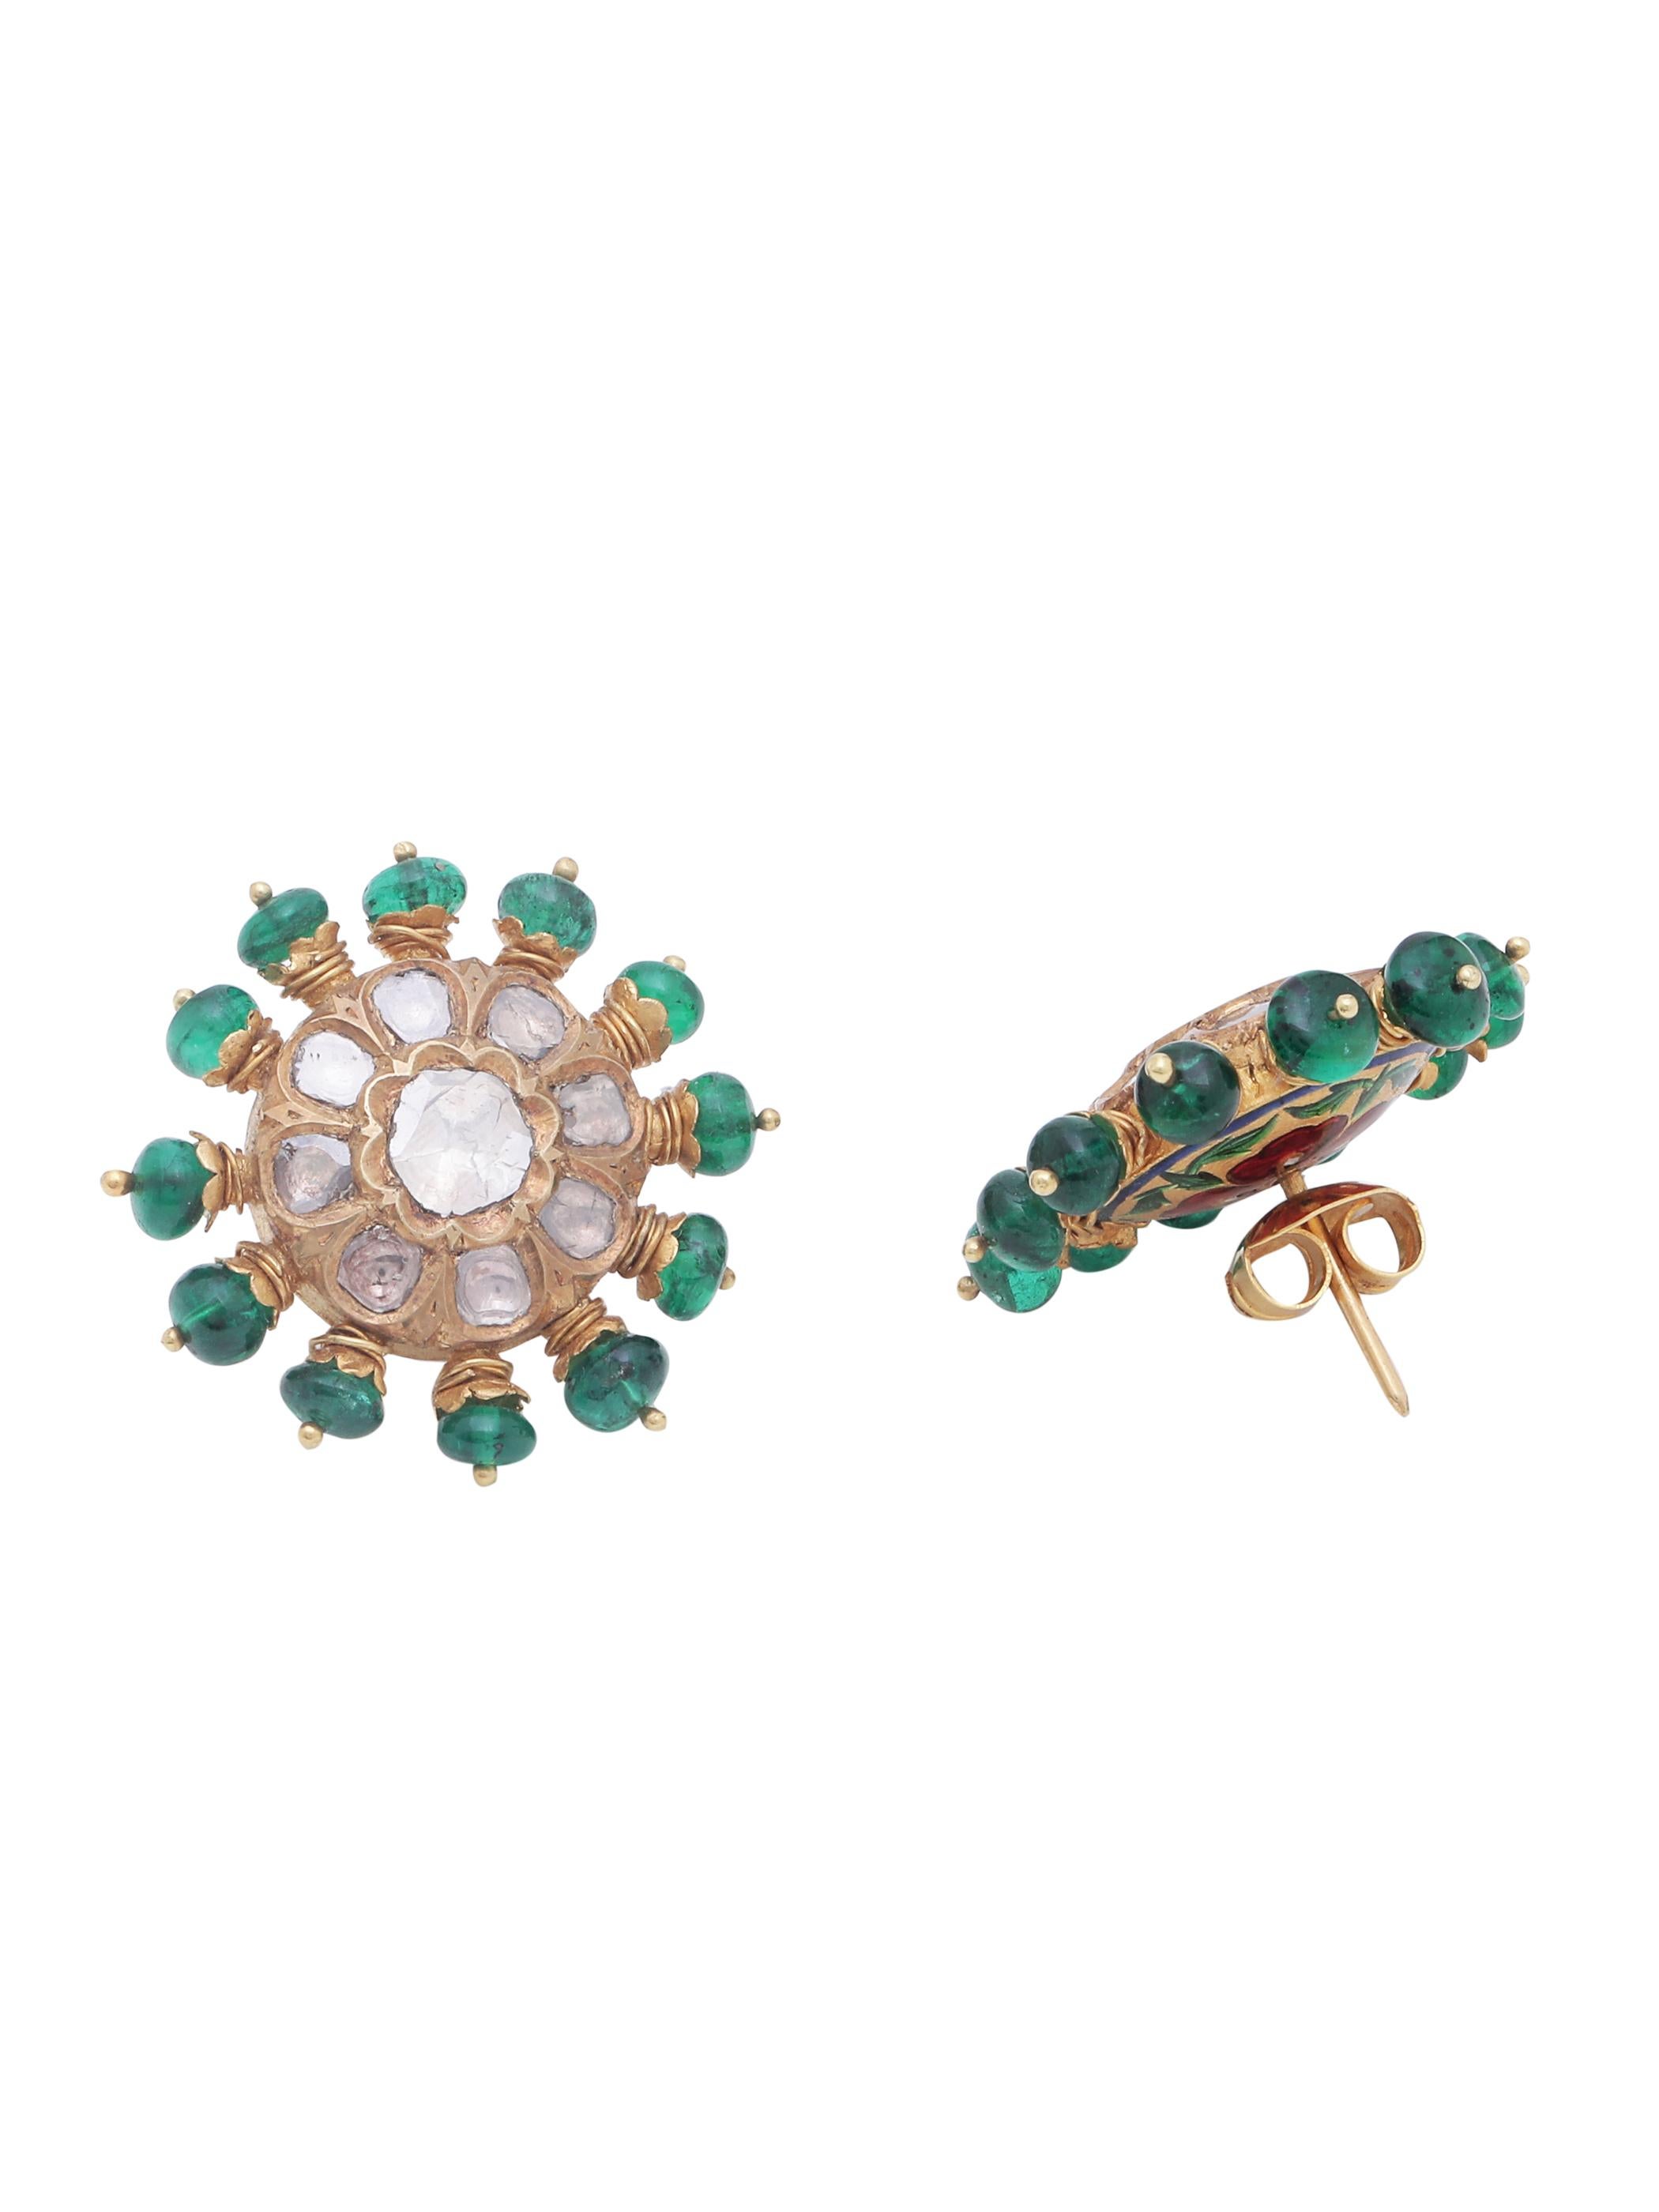 A pair of Studs with Beautiful Flat Rose cut diamonds and Emerald beads set all around. 
The Zambian Emerald beads are set in a very unique way on the circumference of the earring. The diamonds are set using 